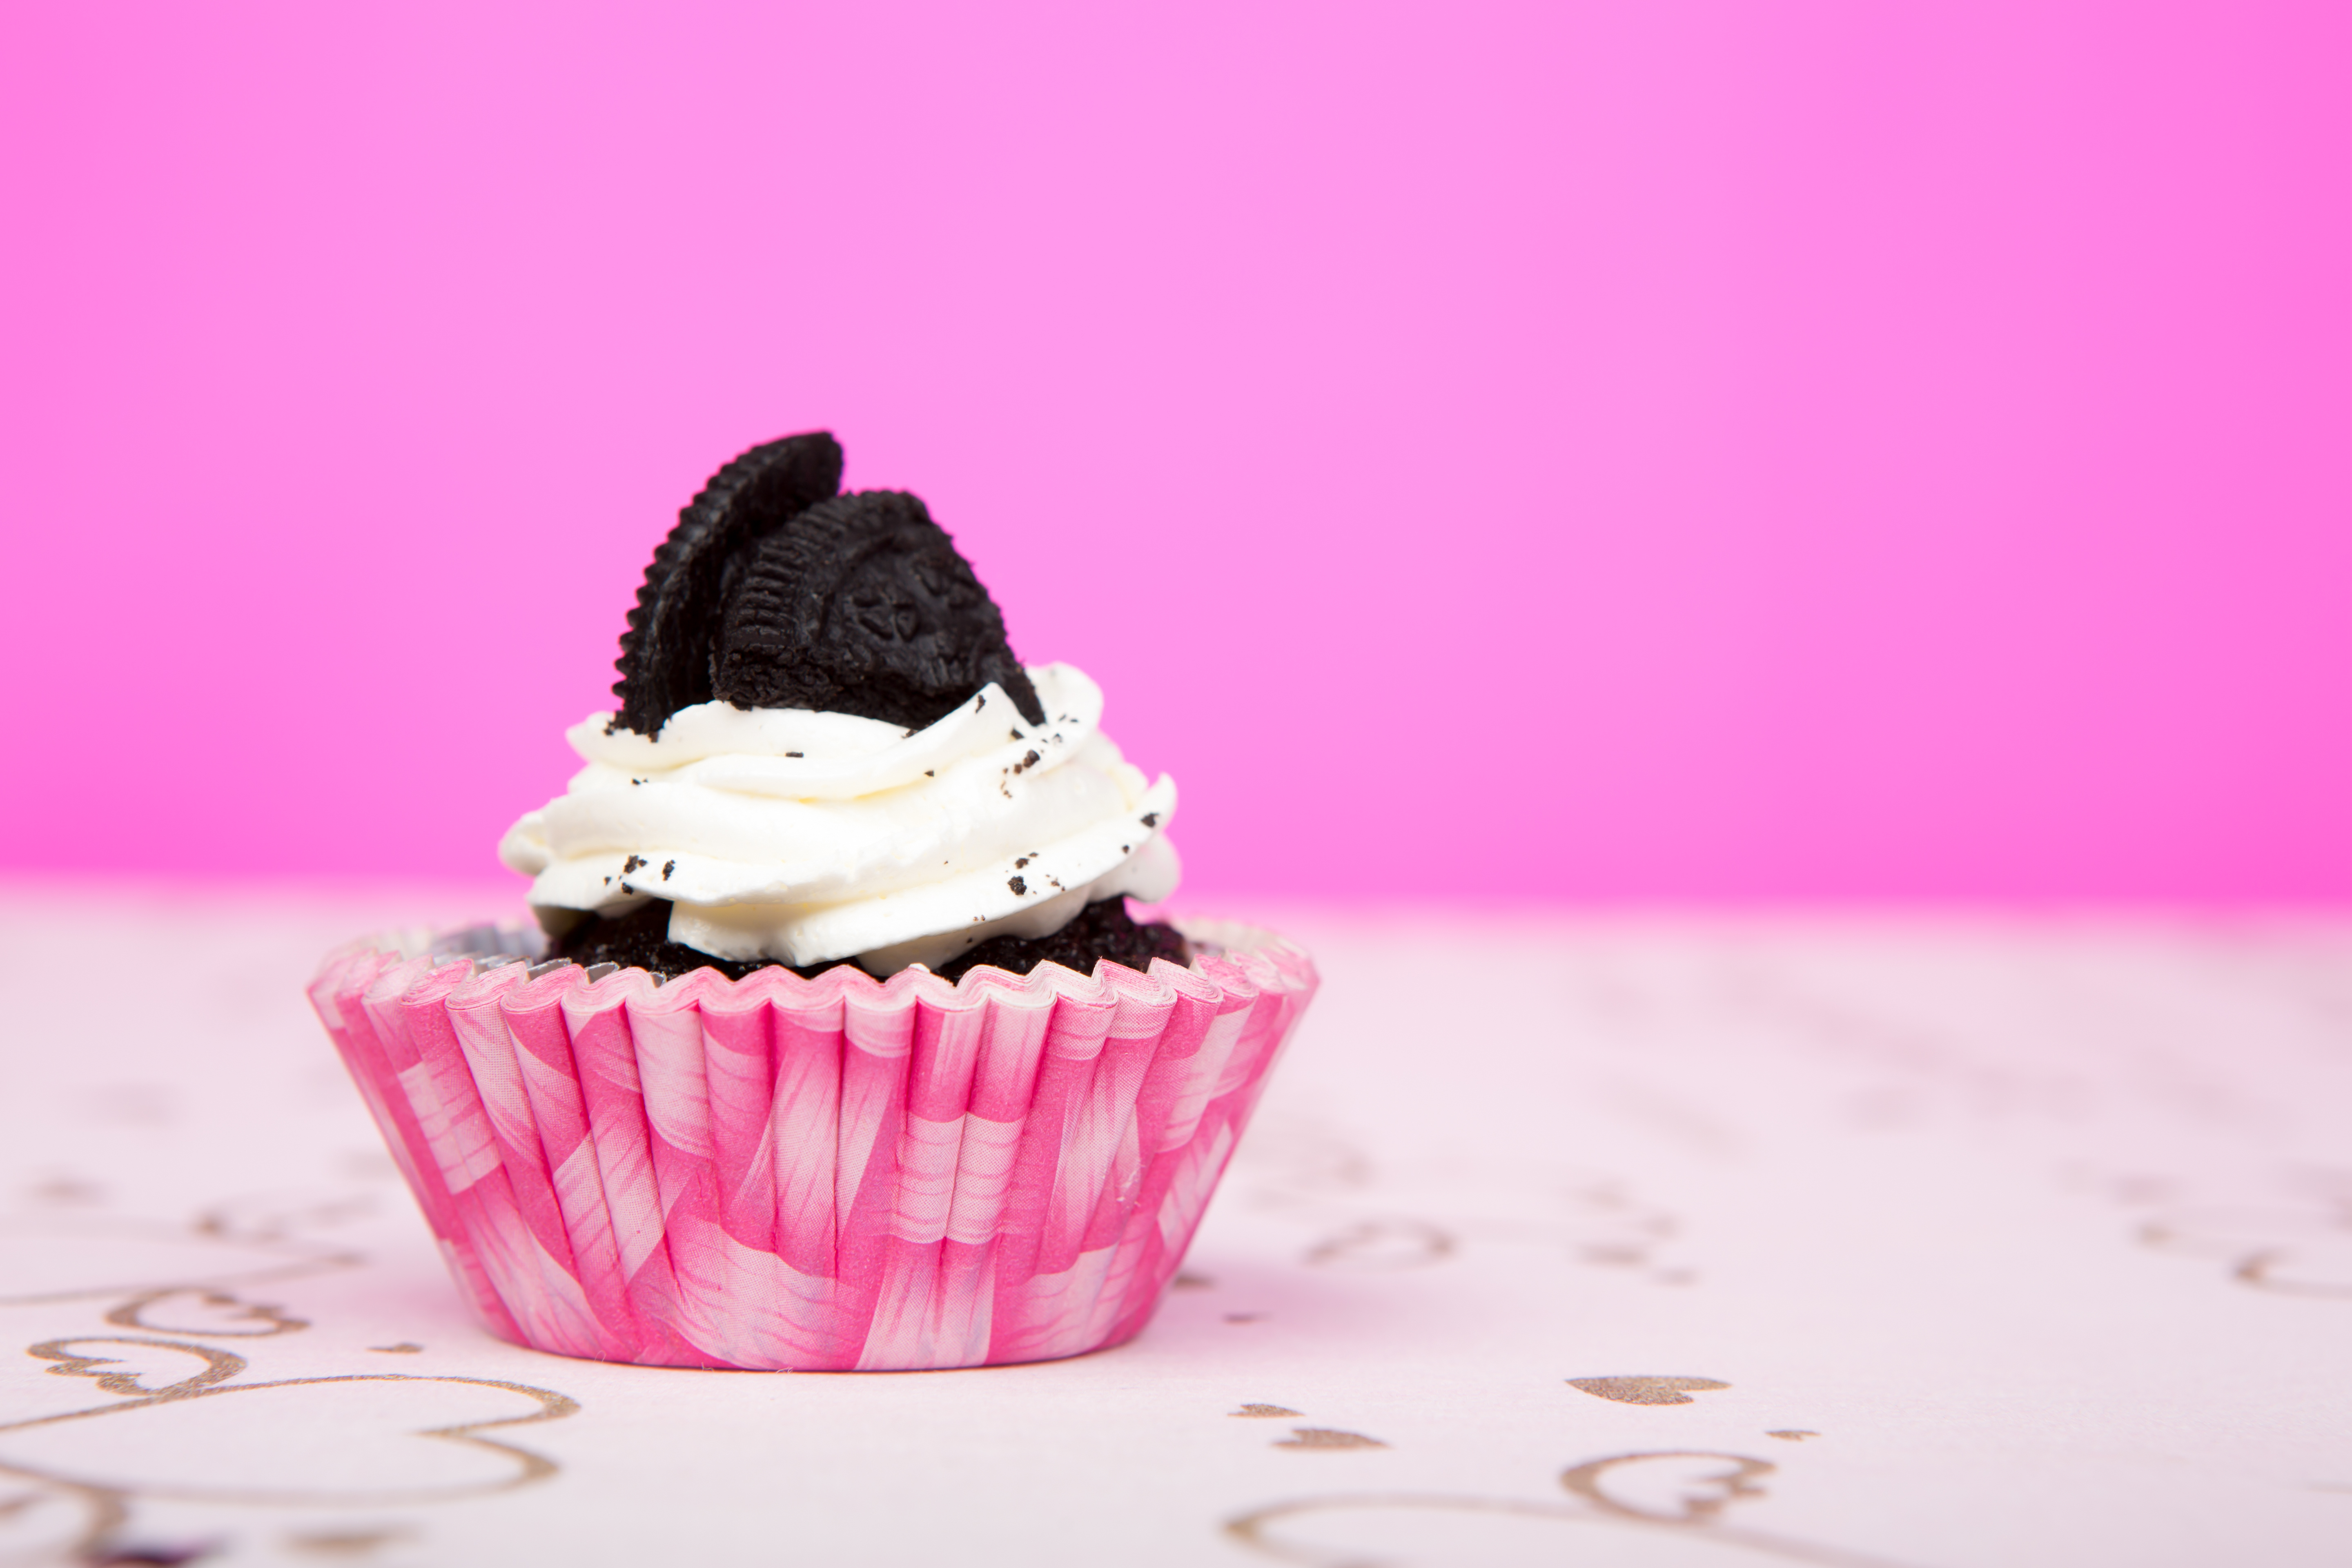 A small chocolate cupcake in a pink cupcake line in front of a pink background.